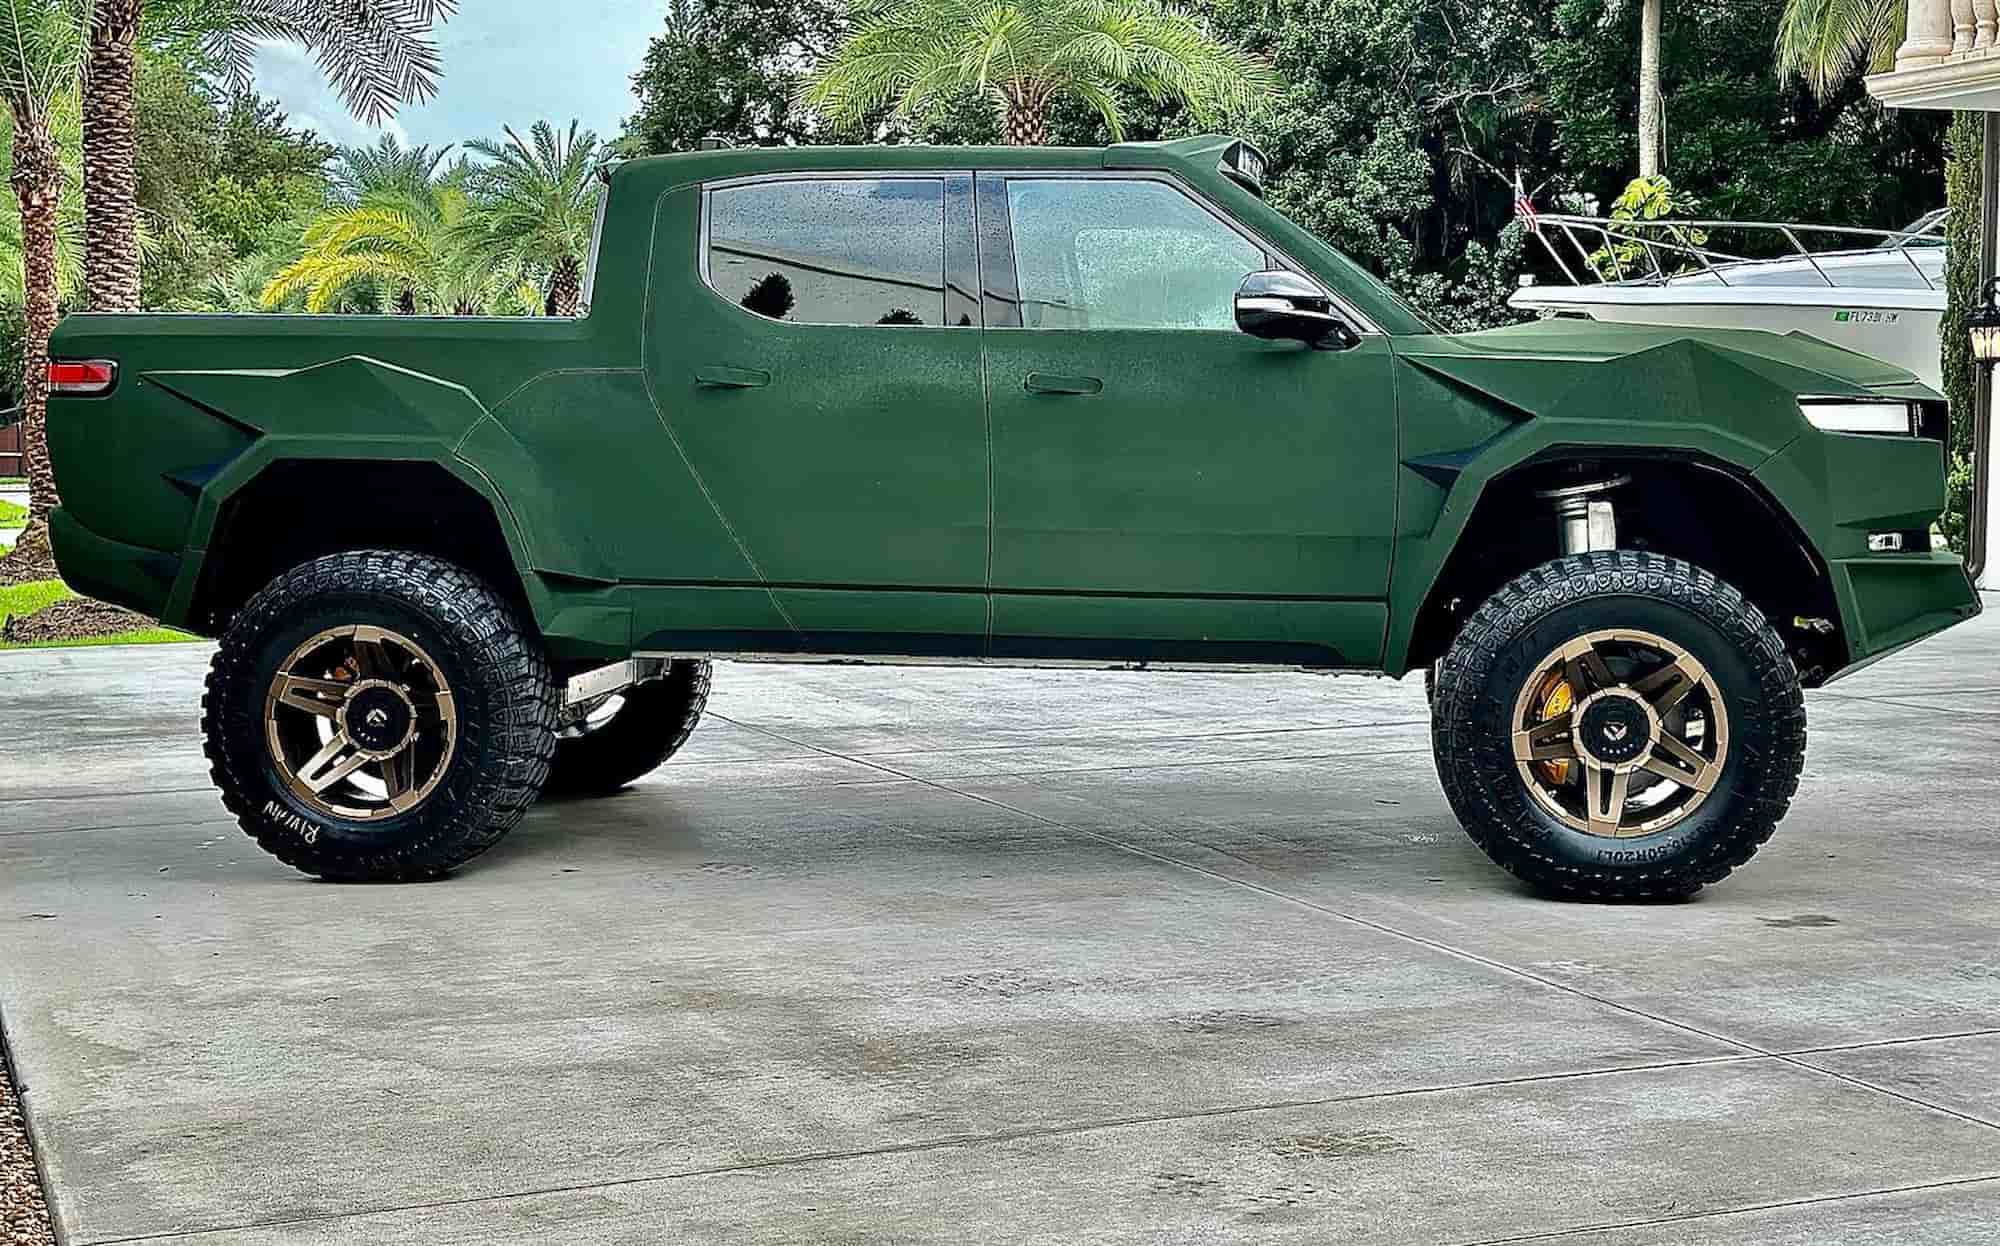 meet the apocalypse nirvana a rad rivian r1t on steroids claiming some outrageous numbers 2